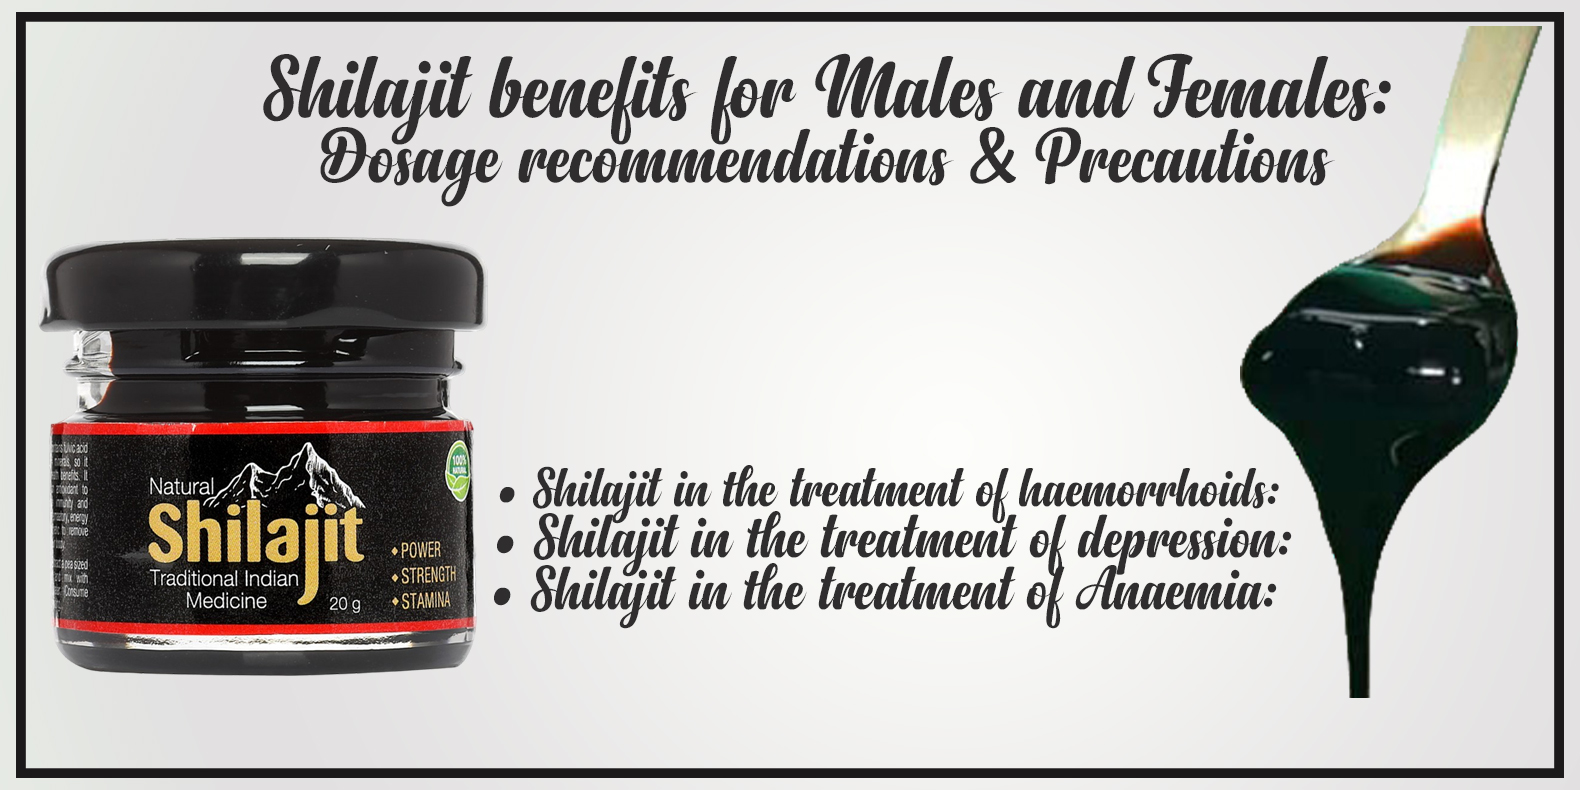 Shilajit benefits for Males and Females: Dosage recommendations & Precautions